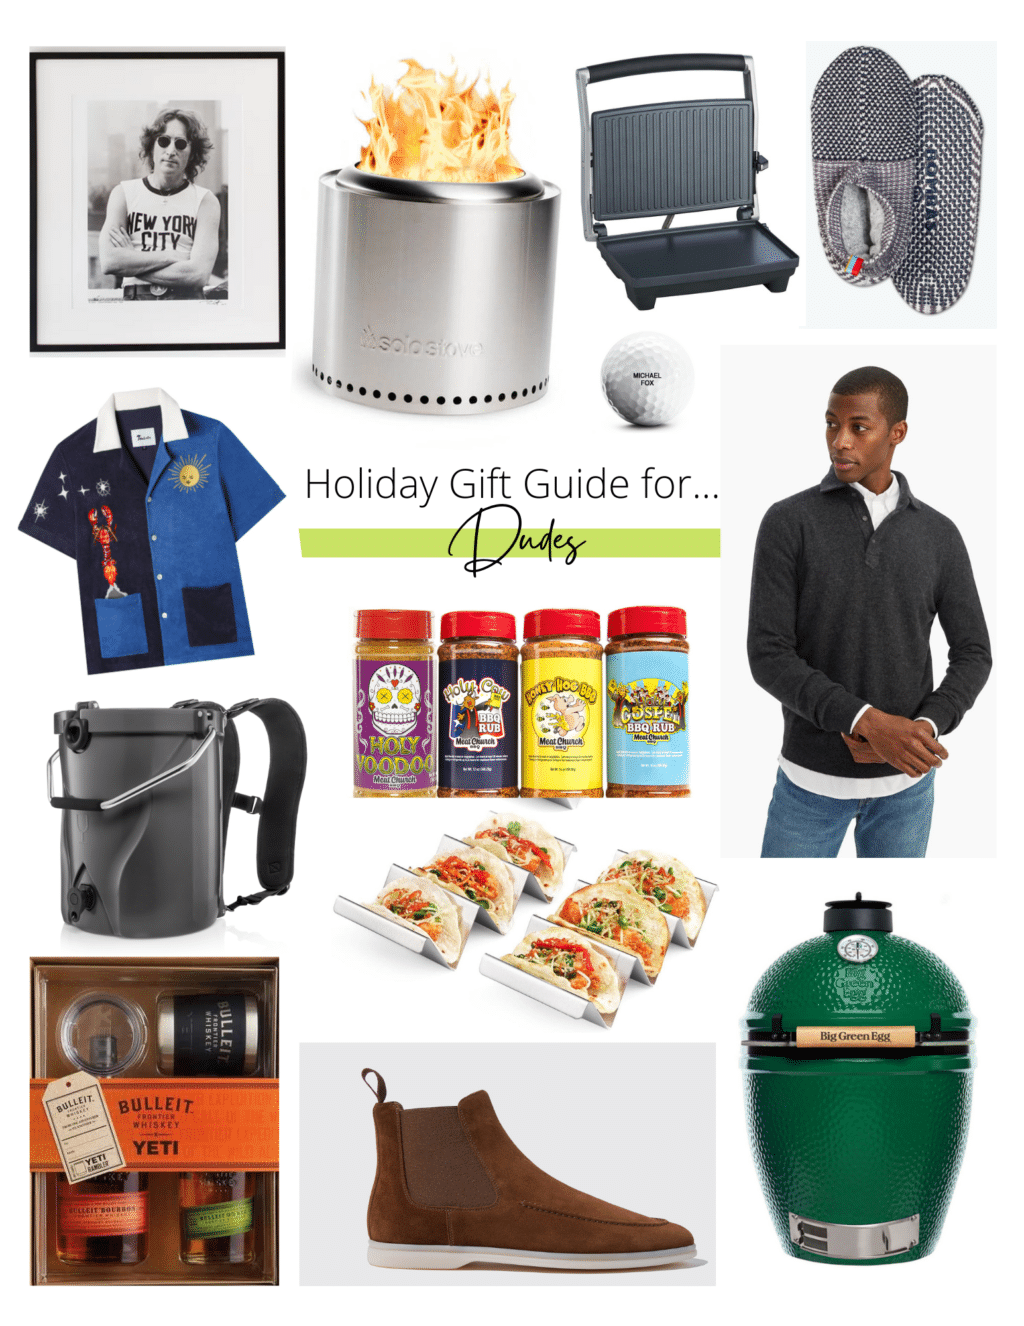 Collage of a variety of gift ideas for men.